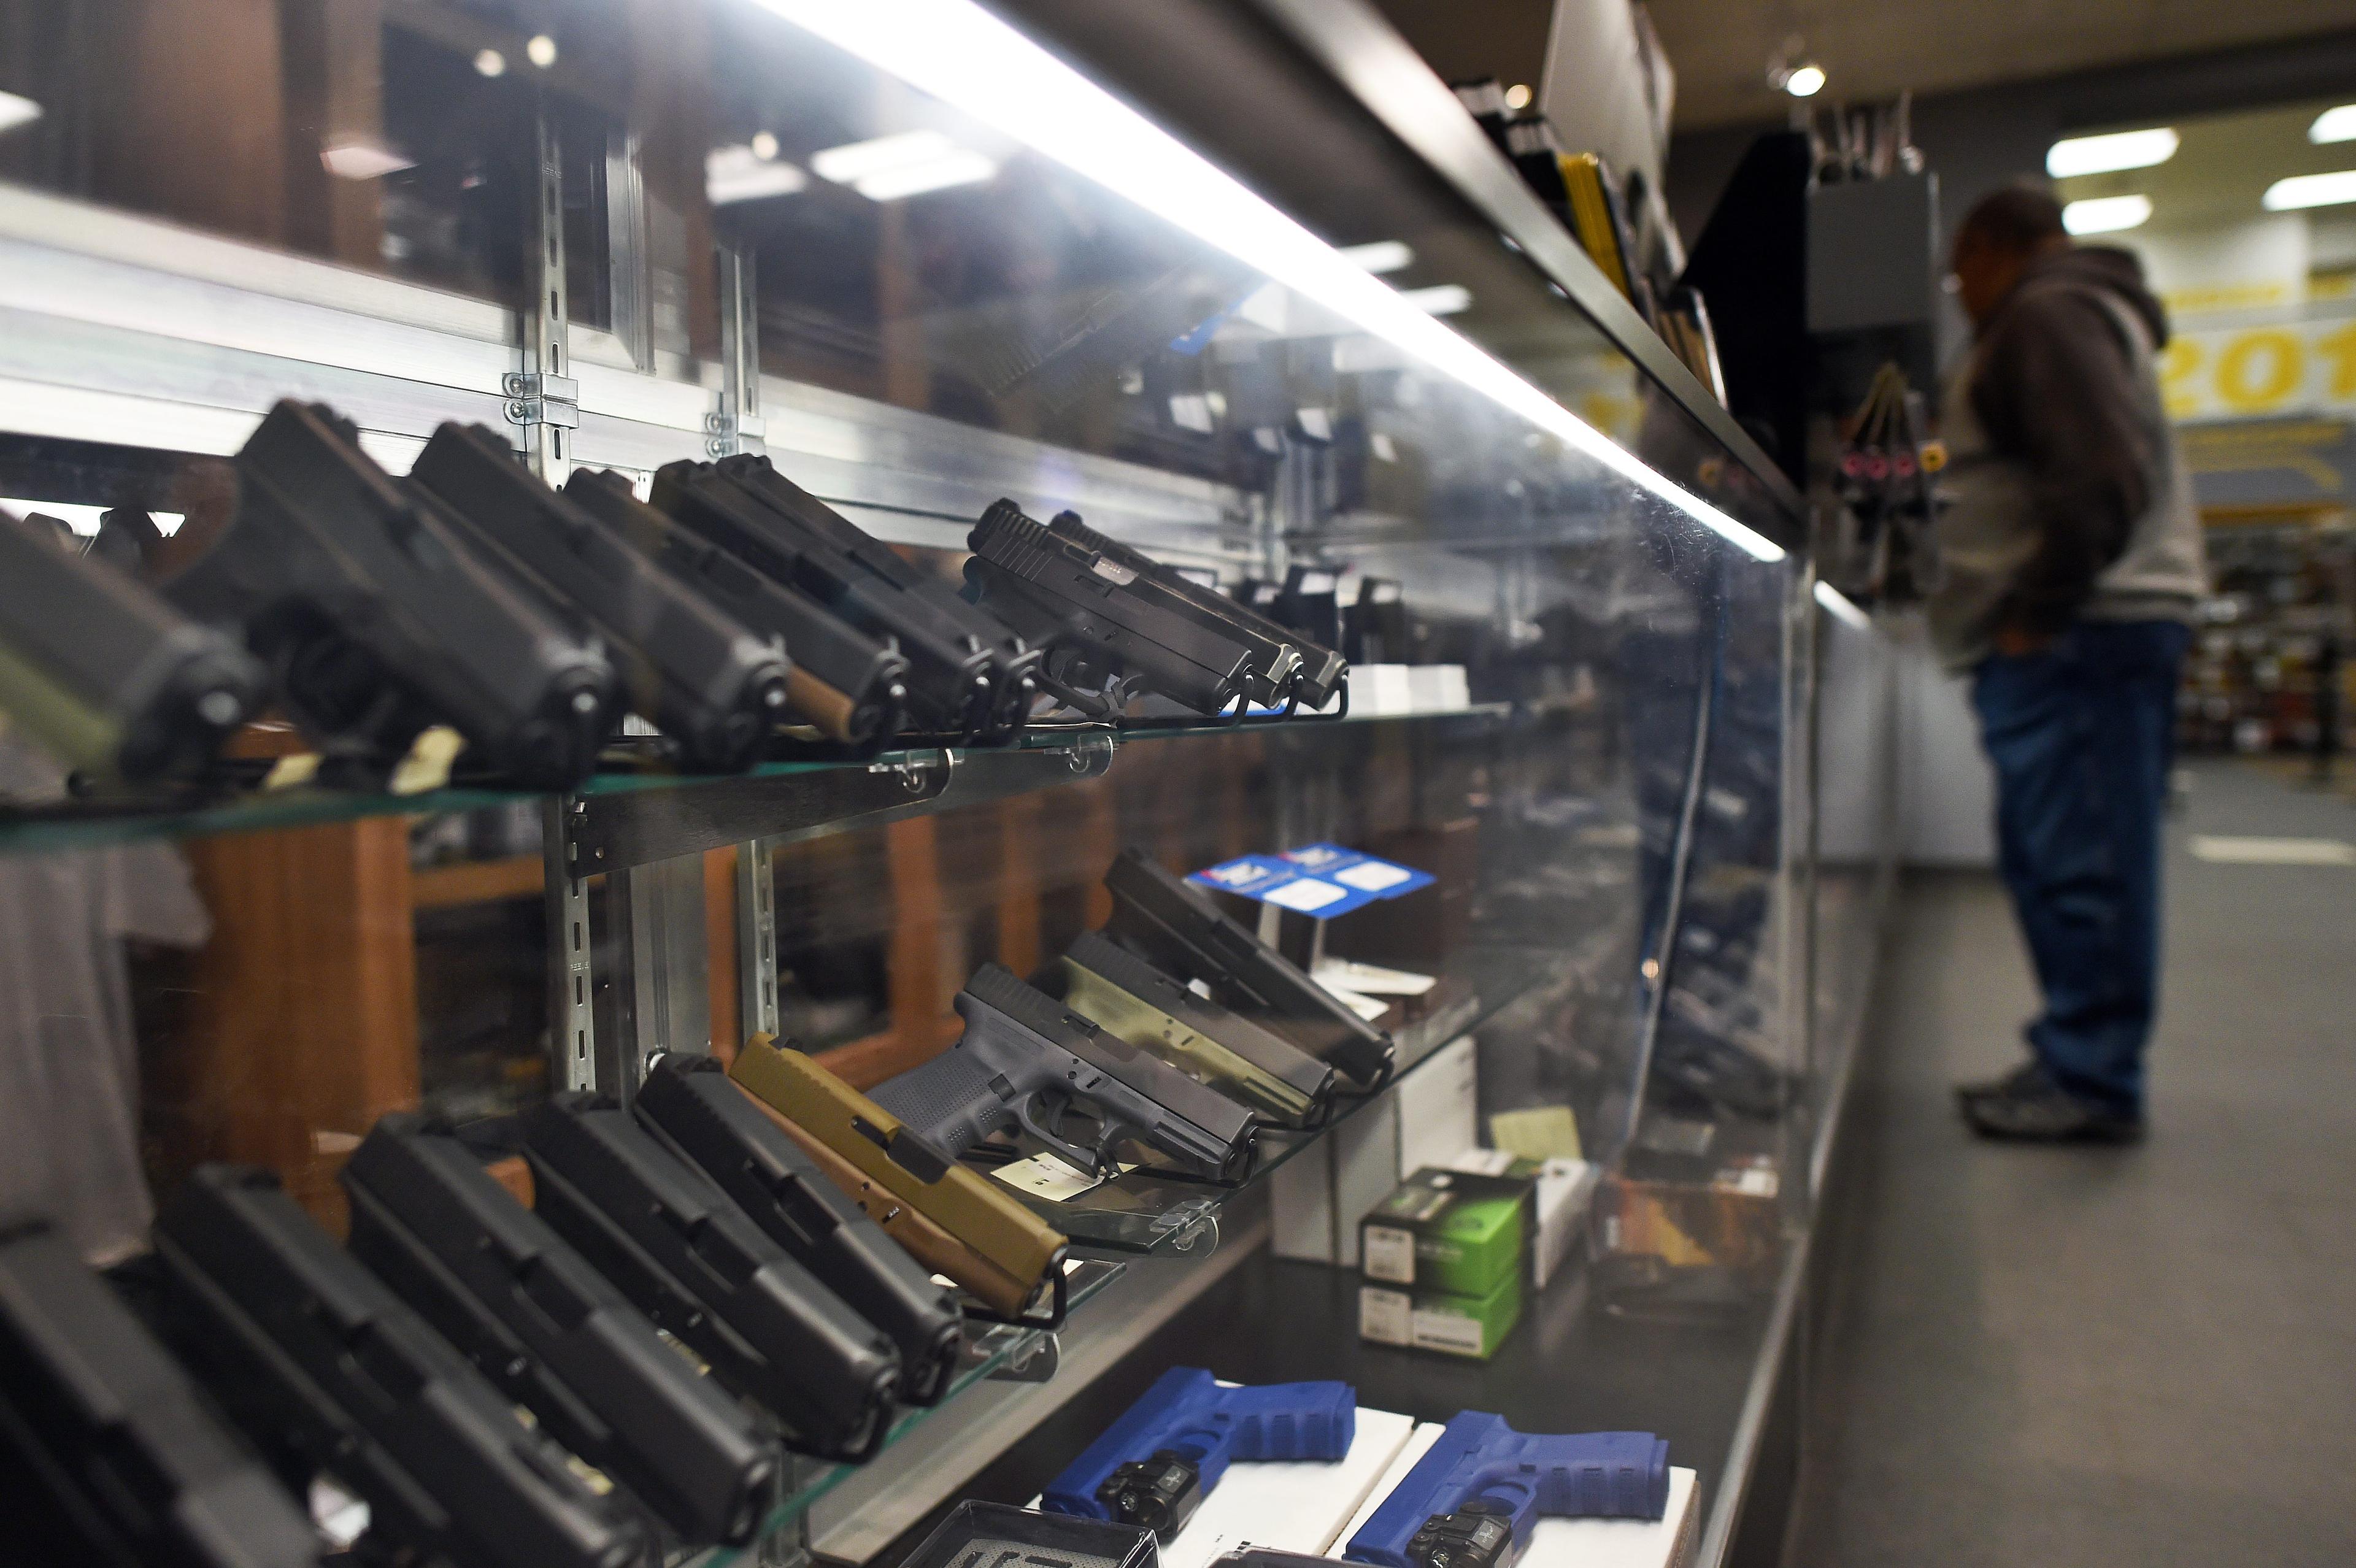 California Bill Would Require Property Insurers to Ask About Gun Ownership